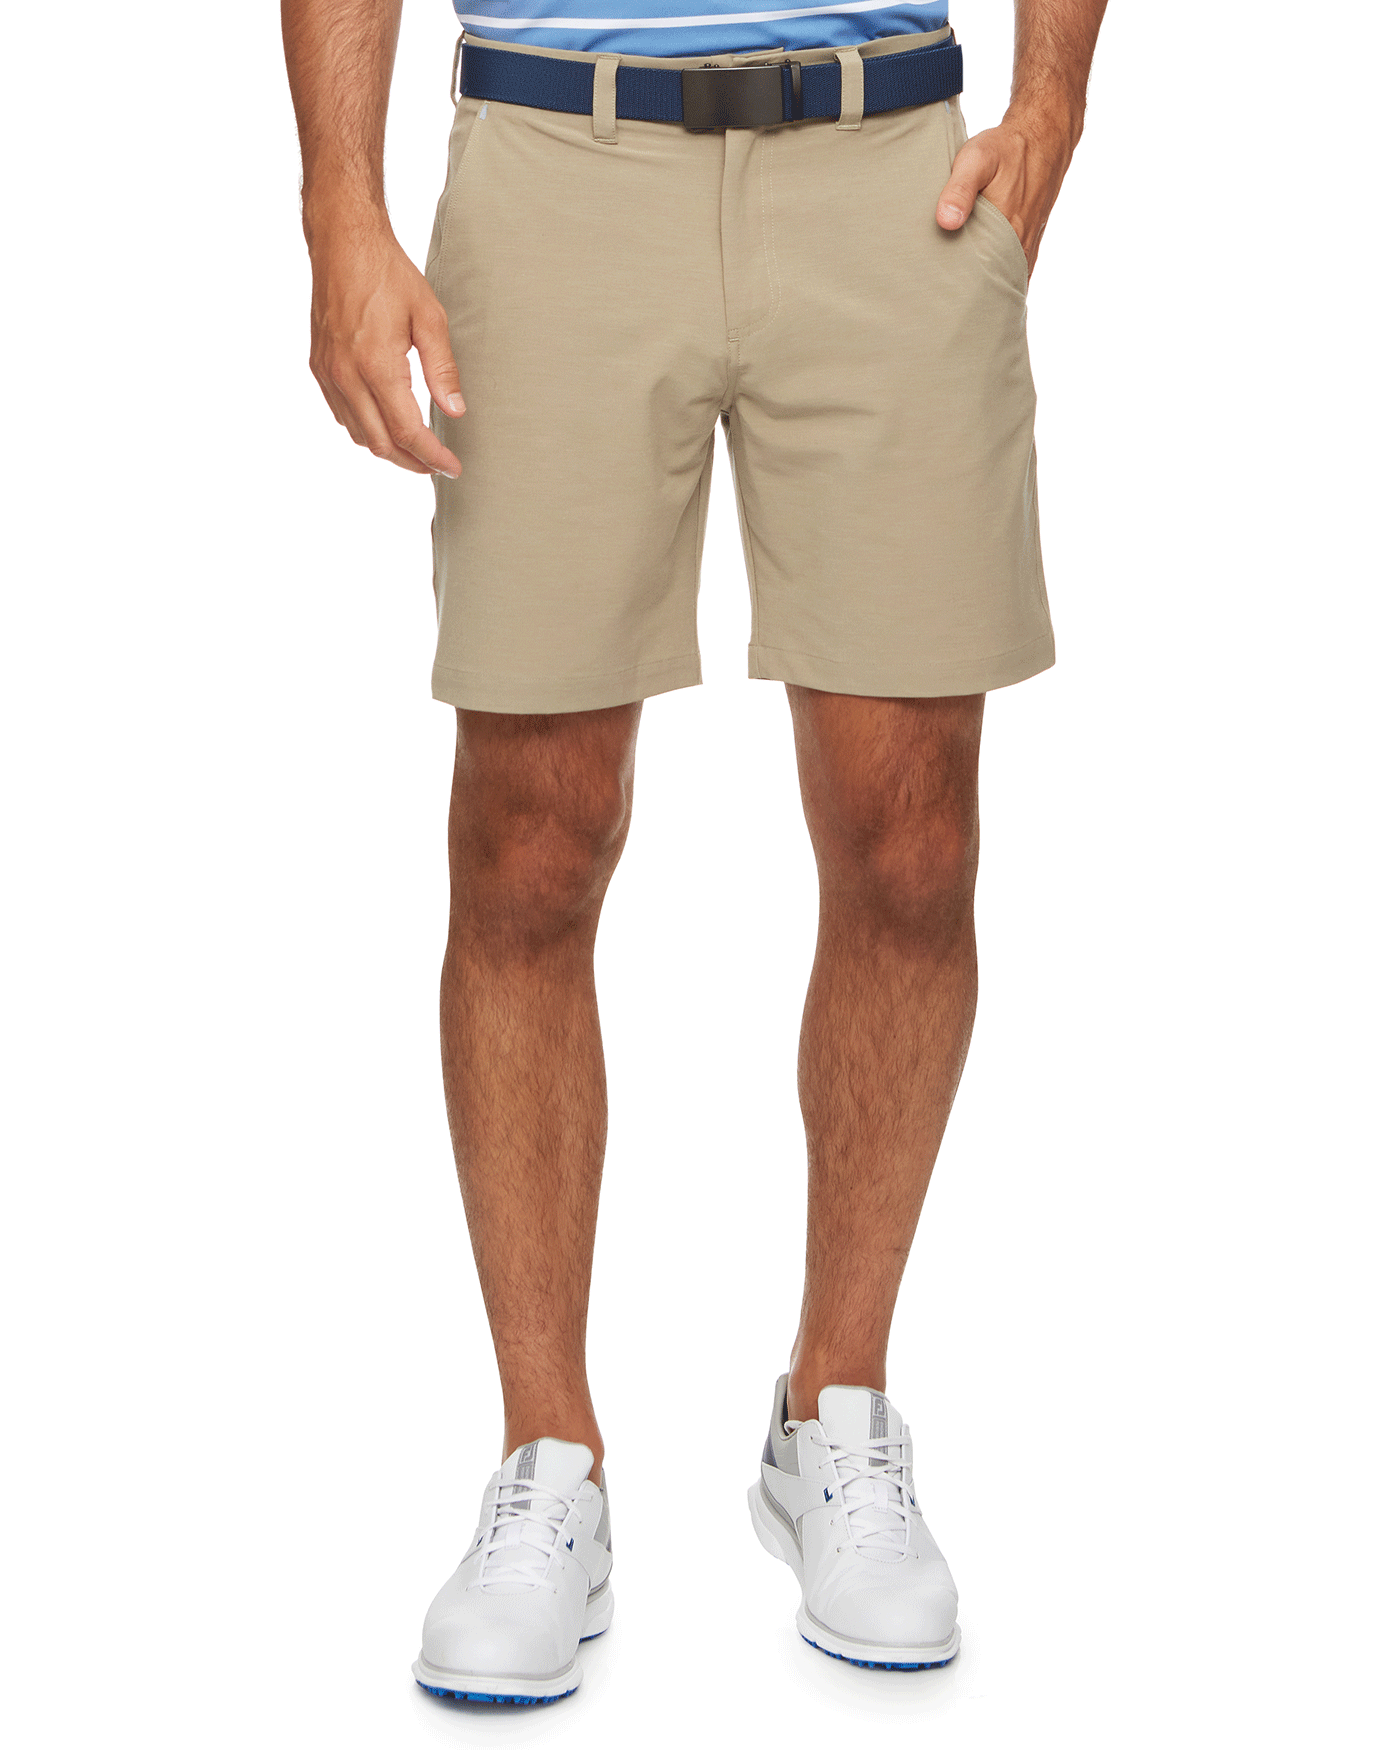 COTTON BLEND ANY-WEAR PERFORMANCE SHORT - 8